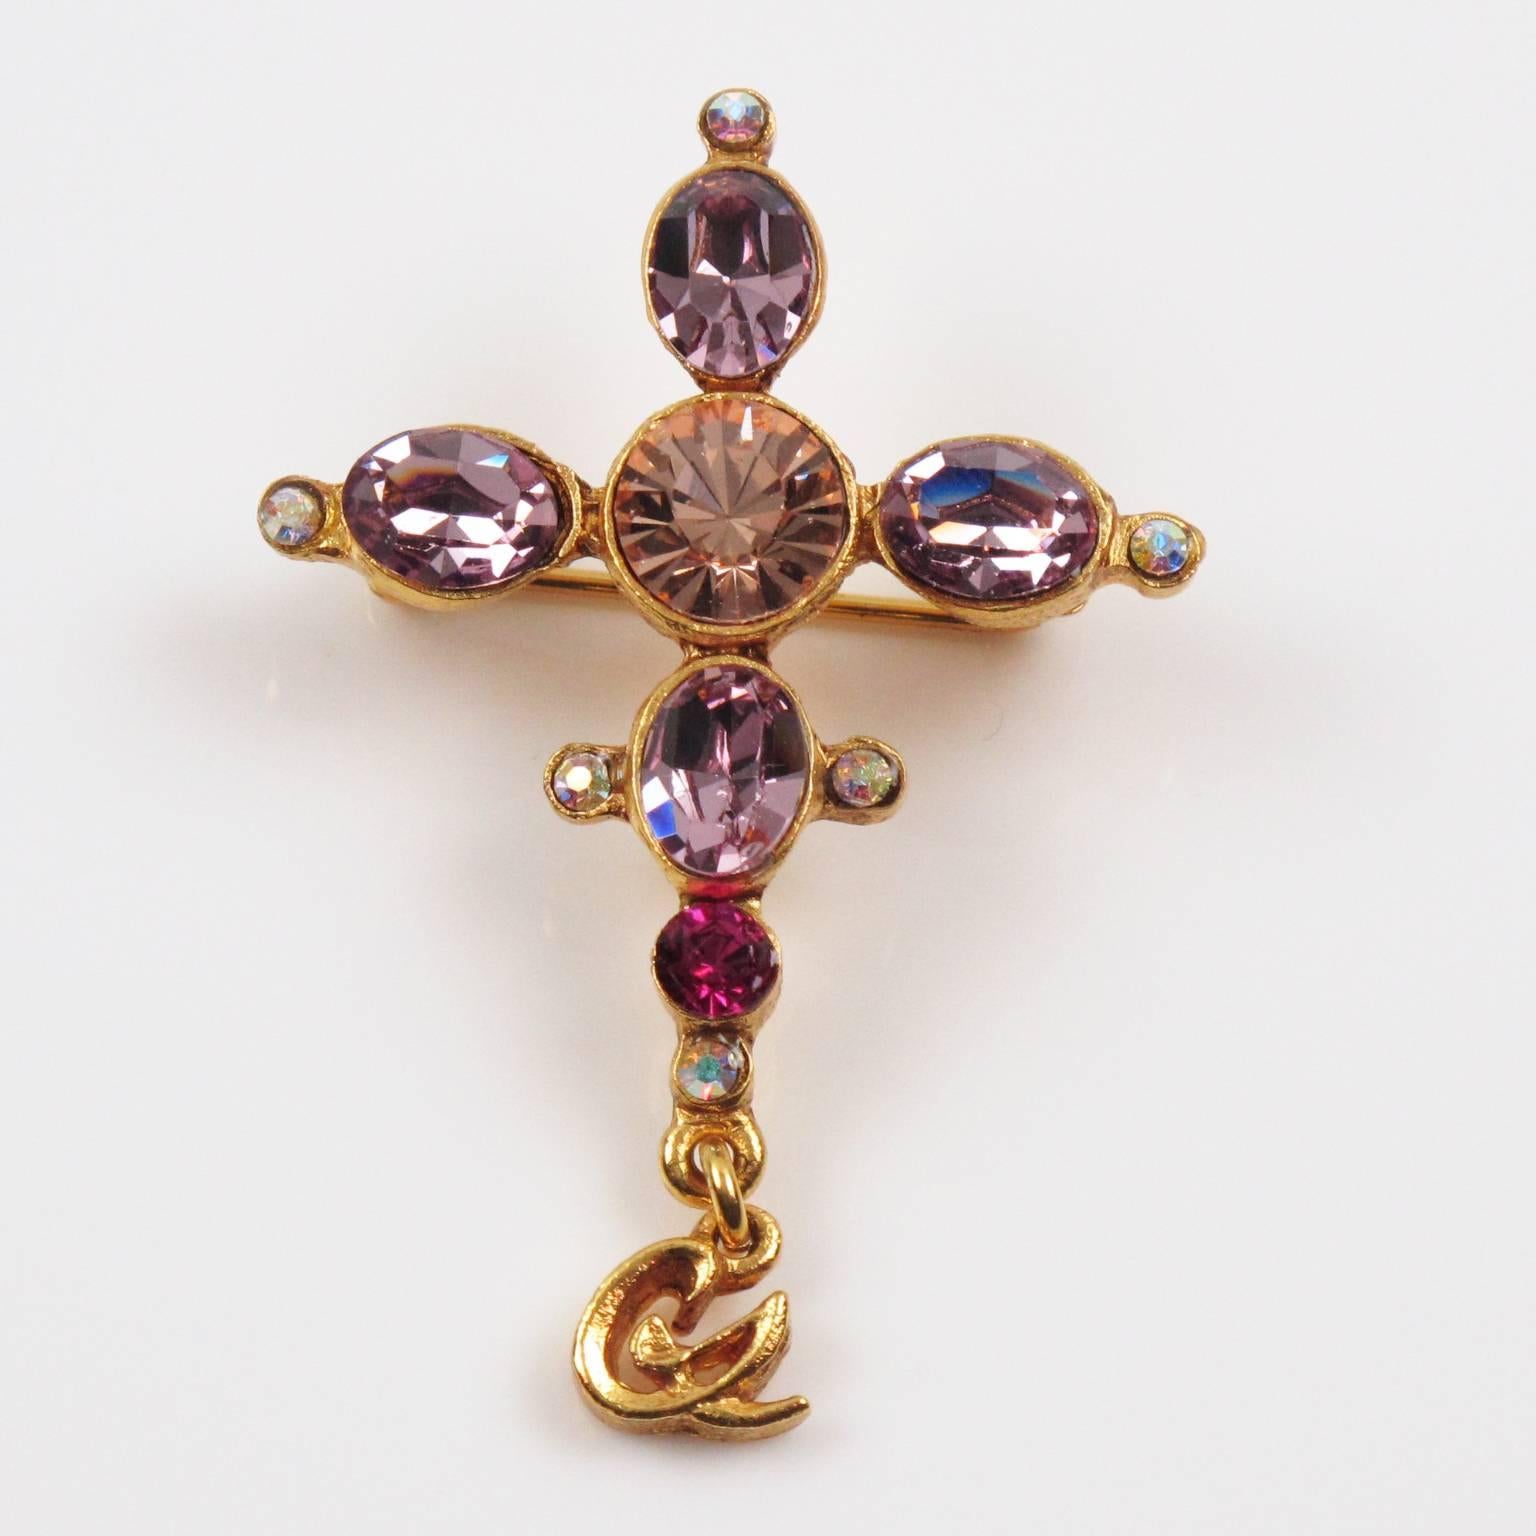 Lovely vintage Christian Lacroix Paris signed Pin Brooch. Jeweled cross shape with gilt metal all textured and ornate with pink and purple rhinestones. Little dangling 